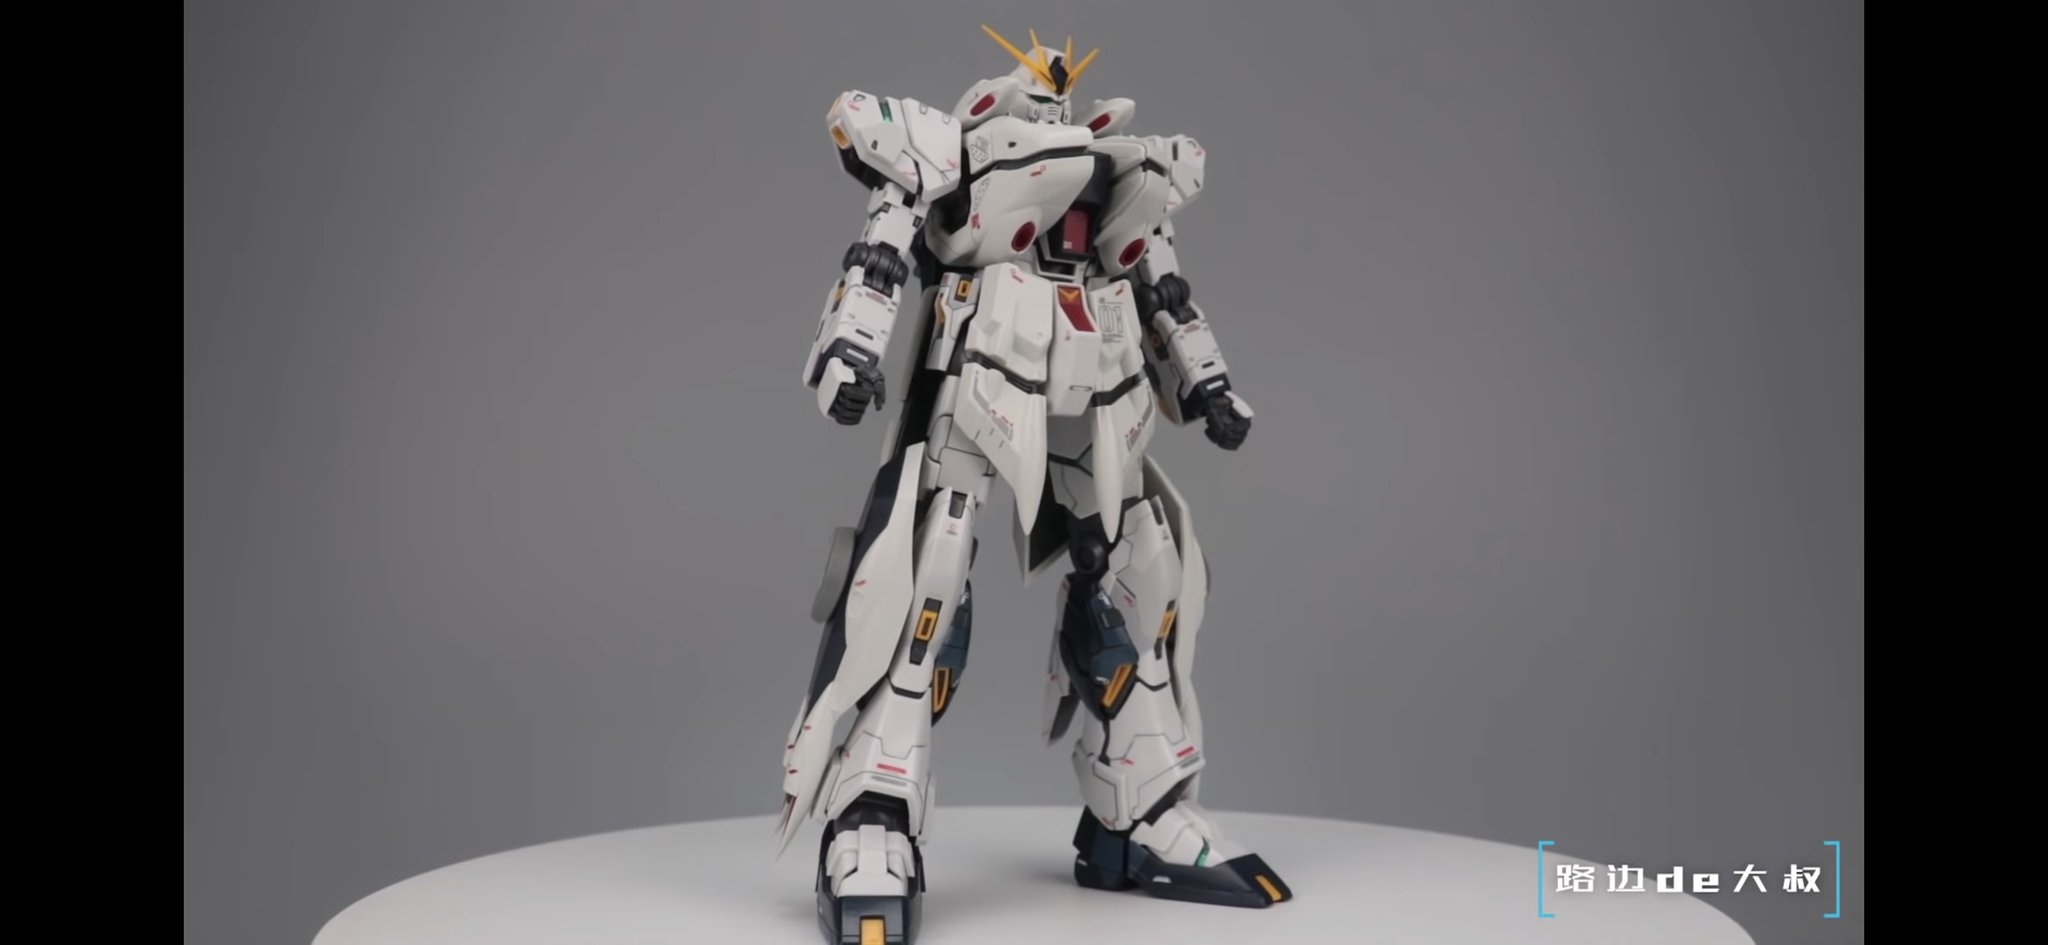 delty on X: BRUH THEY GAVE THE NU GUNDAM BIG AND POINTY BOOBS